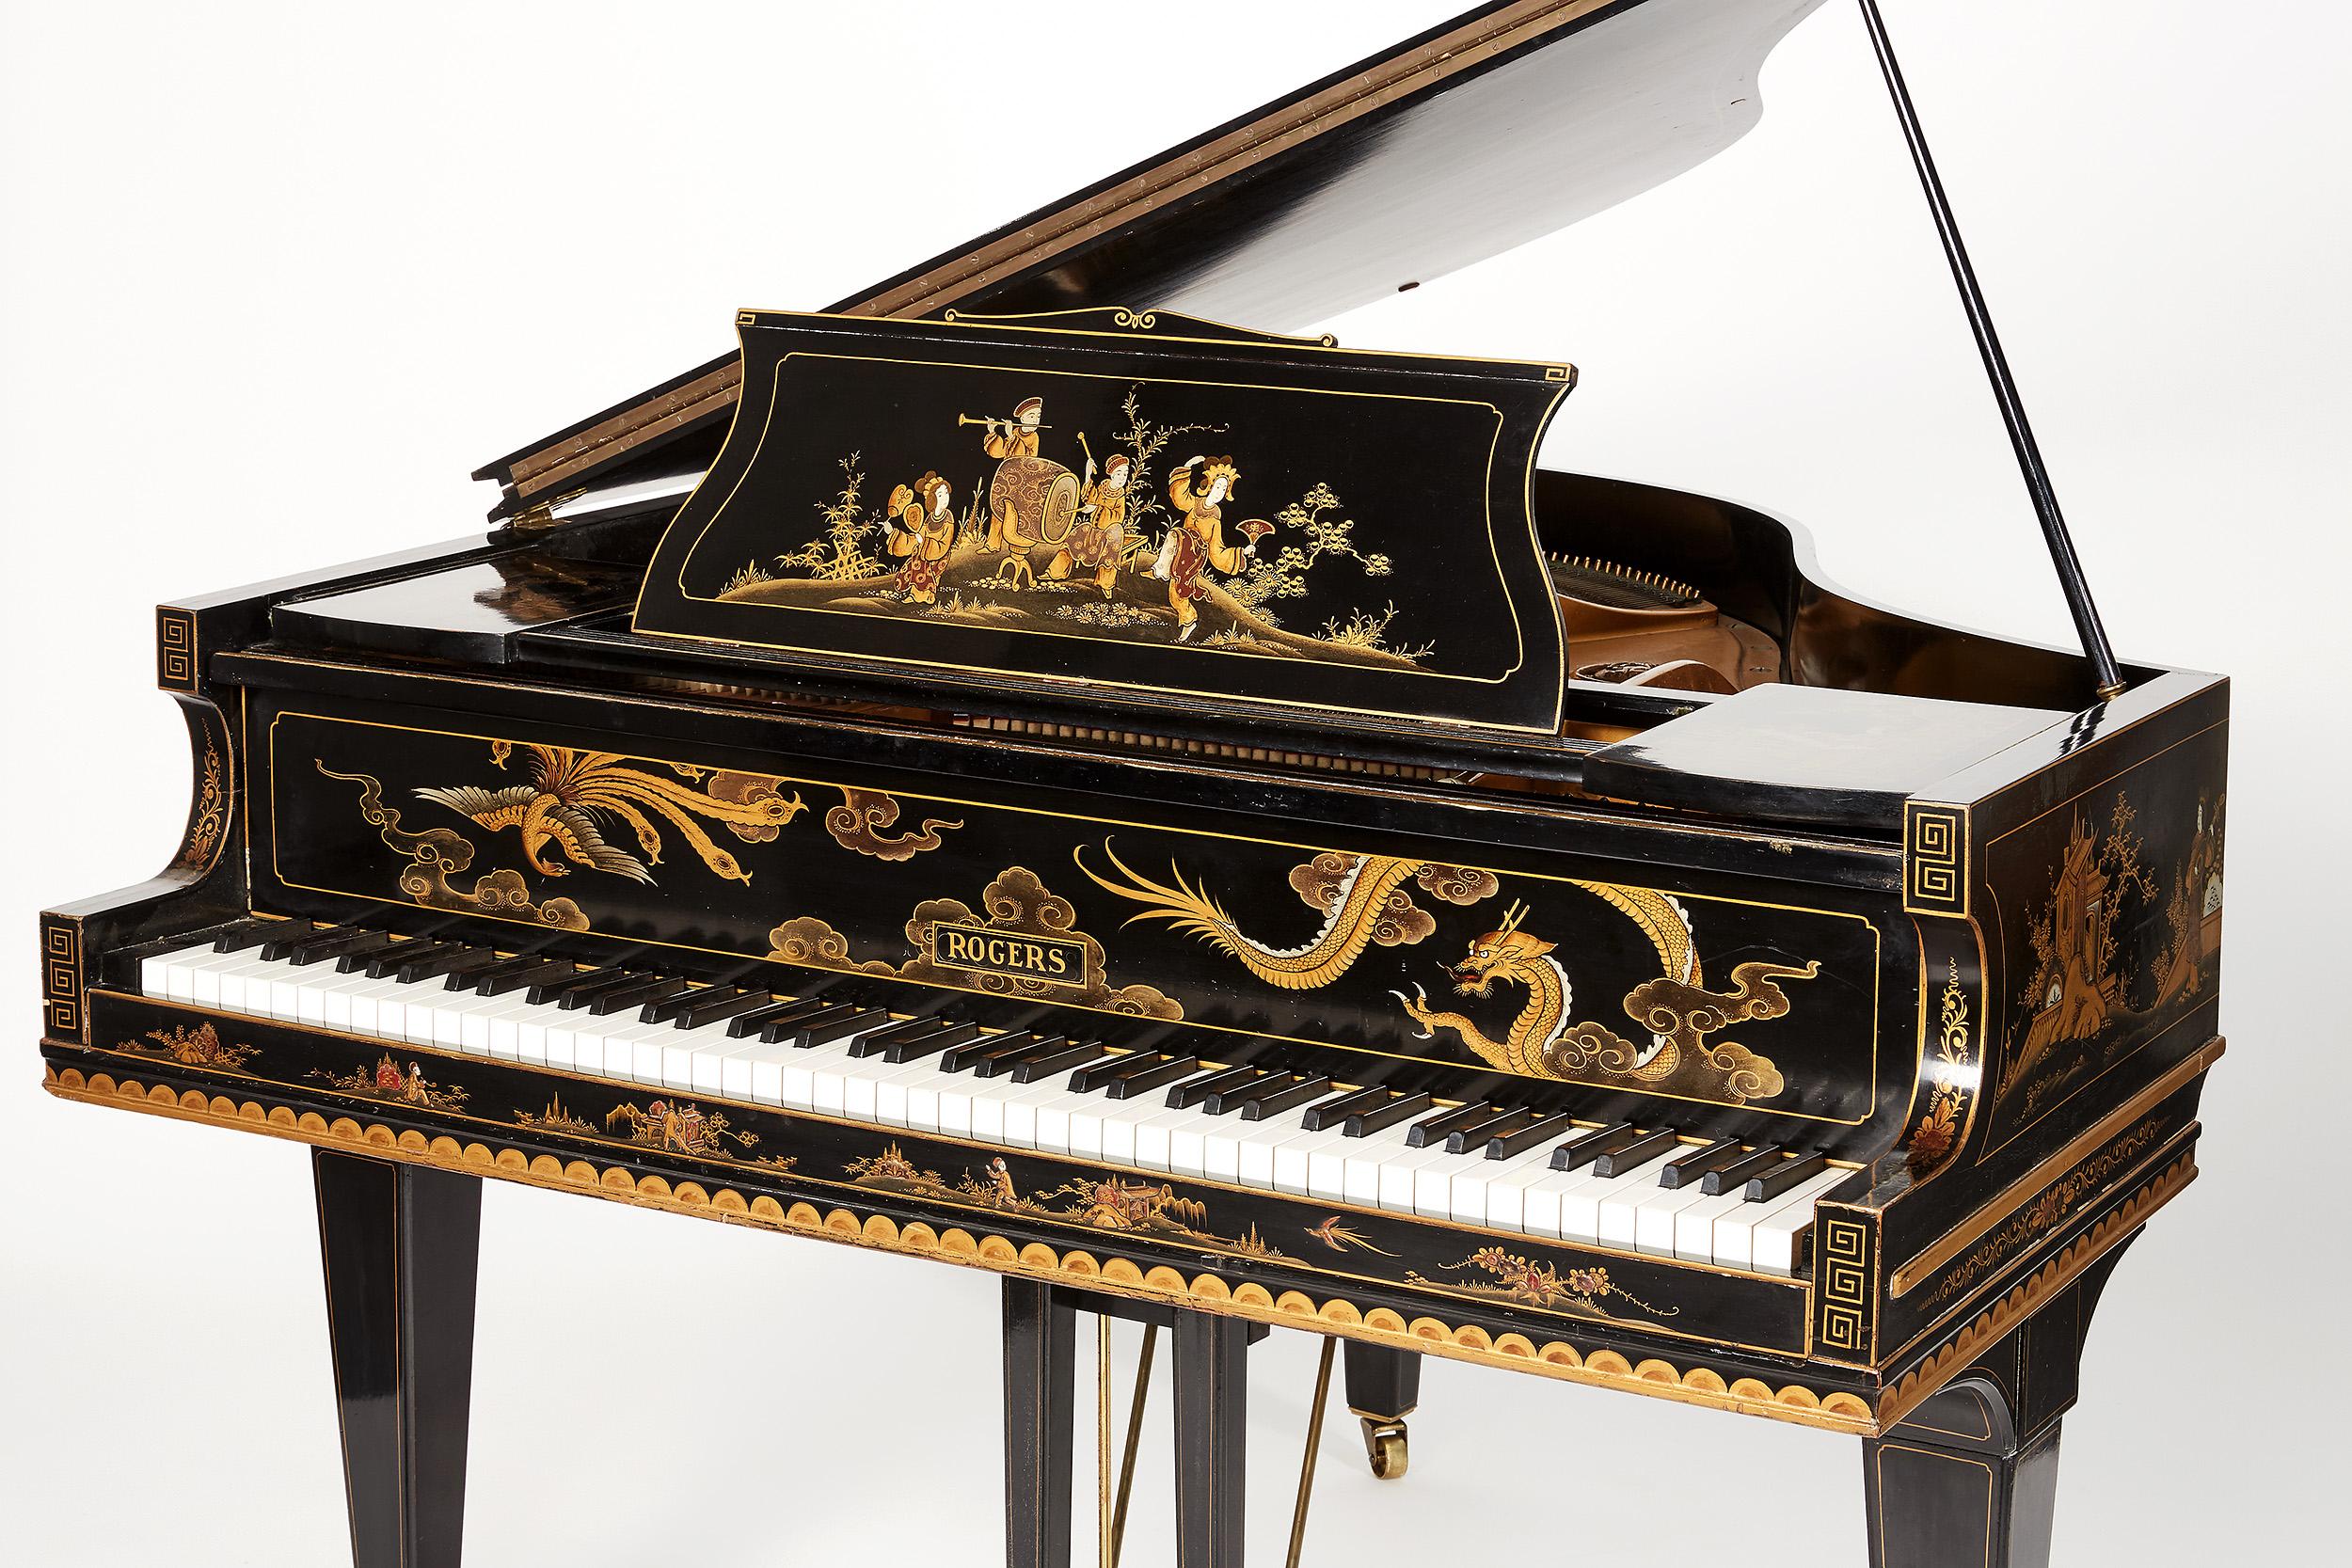 Baby Grand Piano, Art Deco with chinoiserie fairytale
Rogers & Sons, London, 1932

To turn this beautiful `Rogers´- grand piano back into a professionally playable condition that moreover reflects its historical significance, the following work was